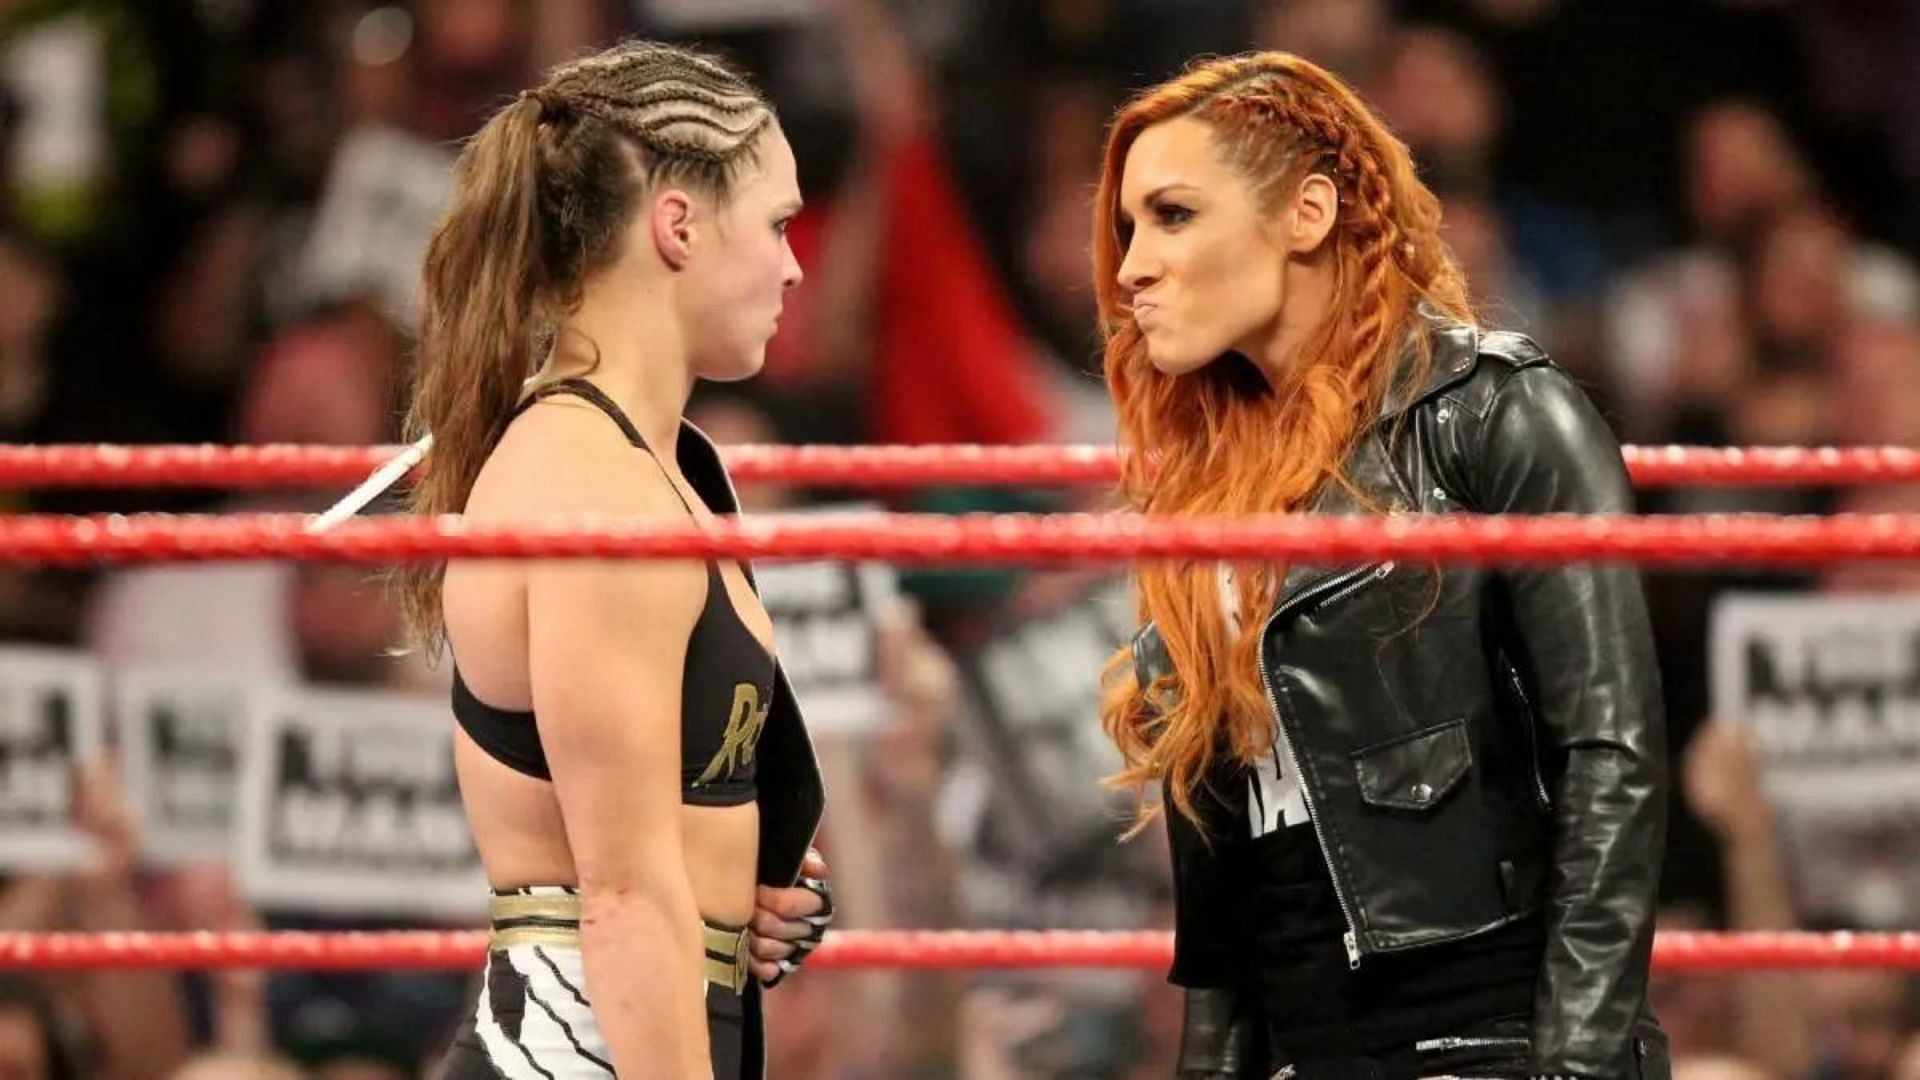 WWE stars Ronda Rousey and Becky Lynch